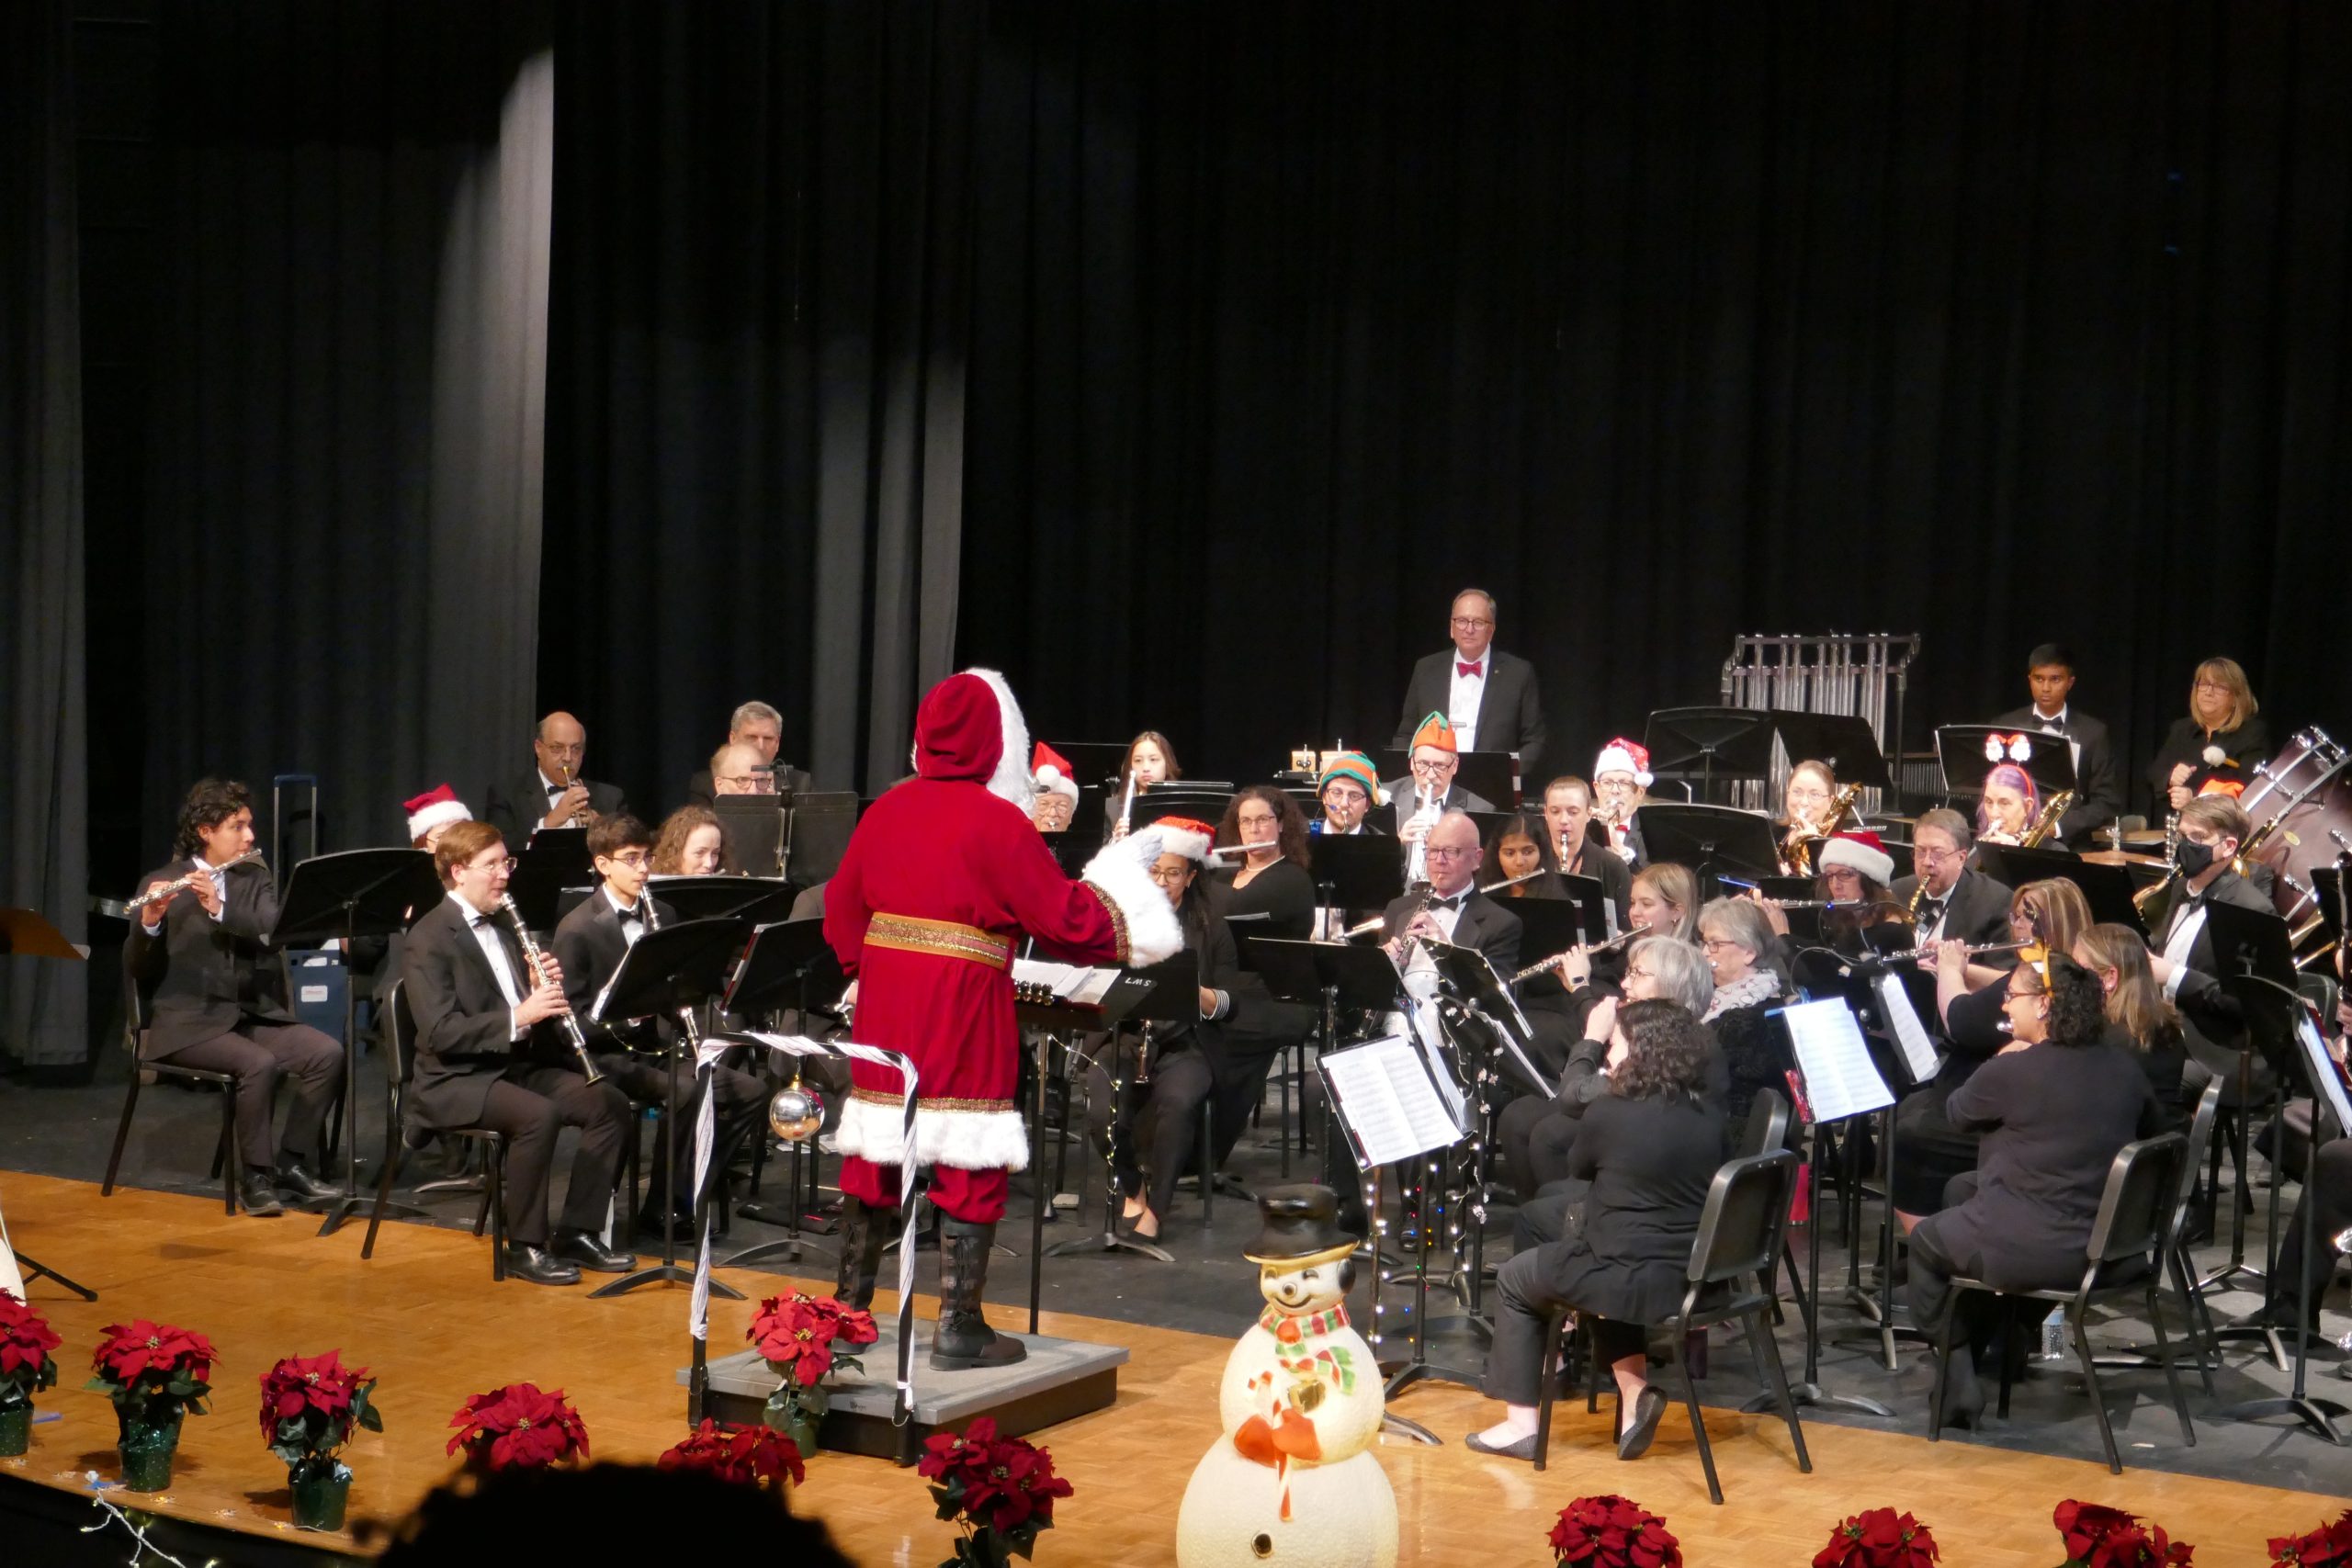 Santa conducting a concert band on stage